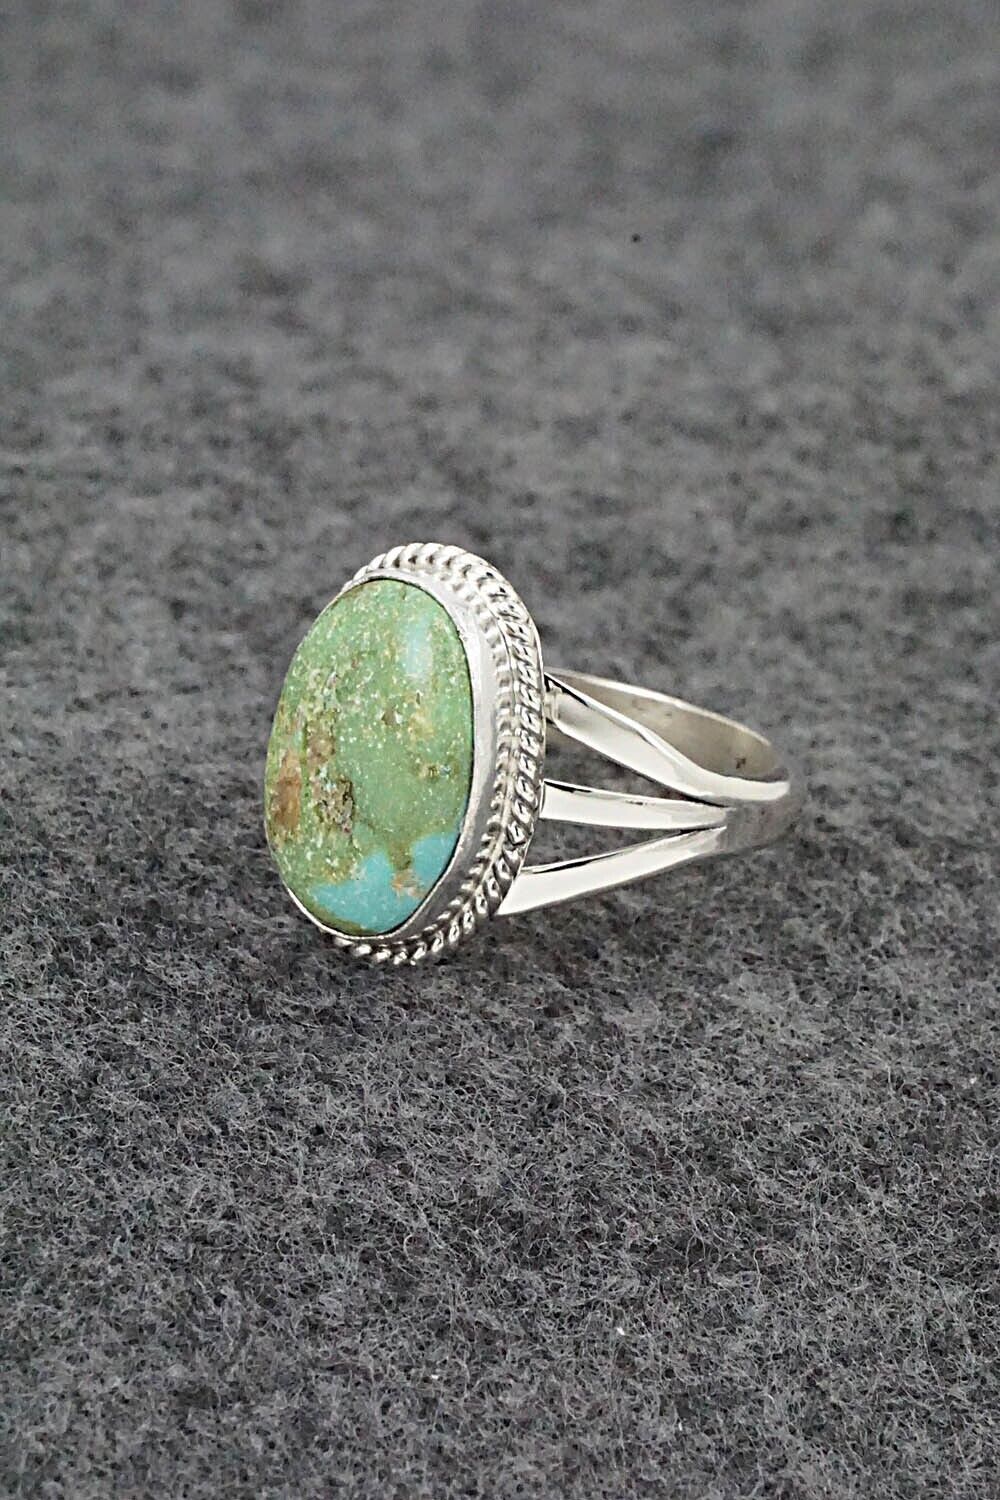 Turquoise & Sterling Silver Ring - Judy Largo - Size 8.5